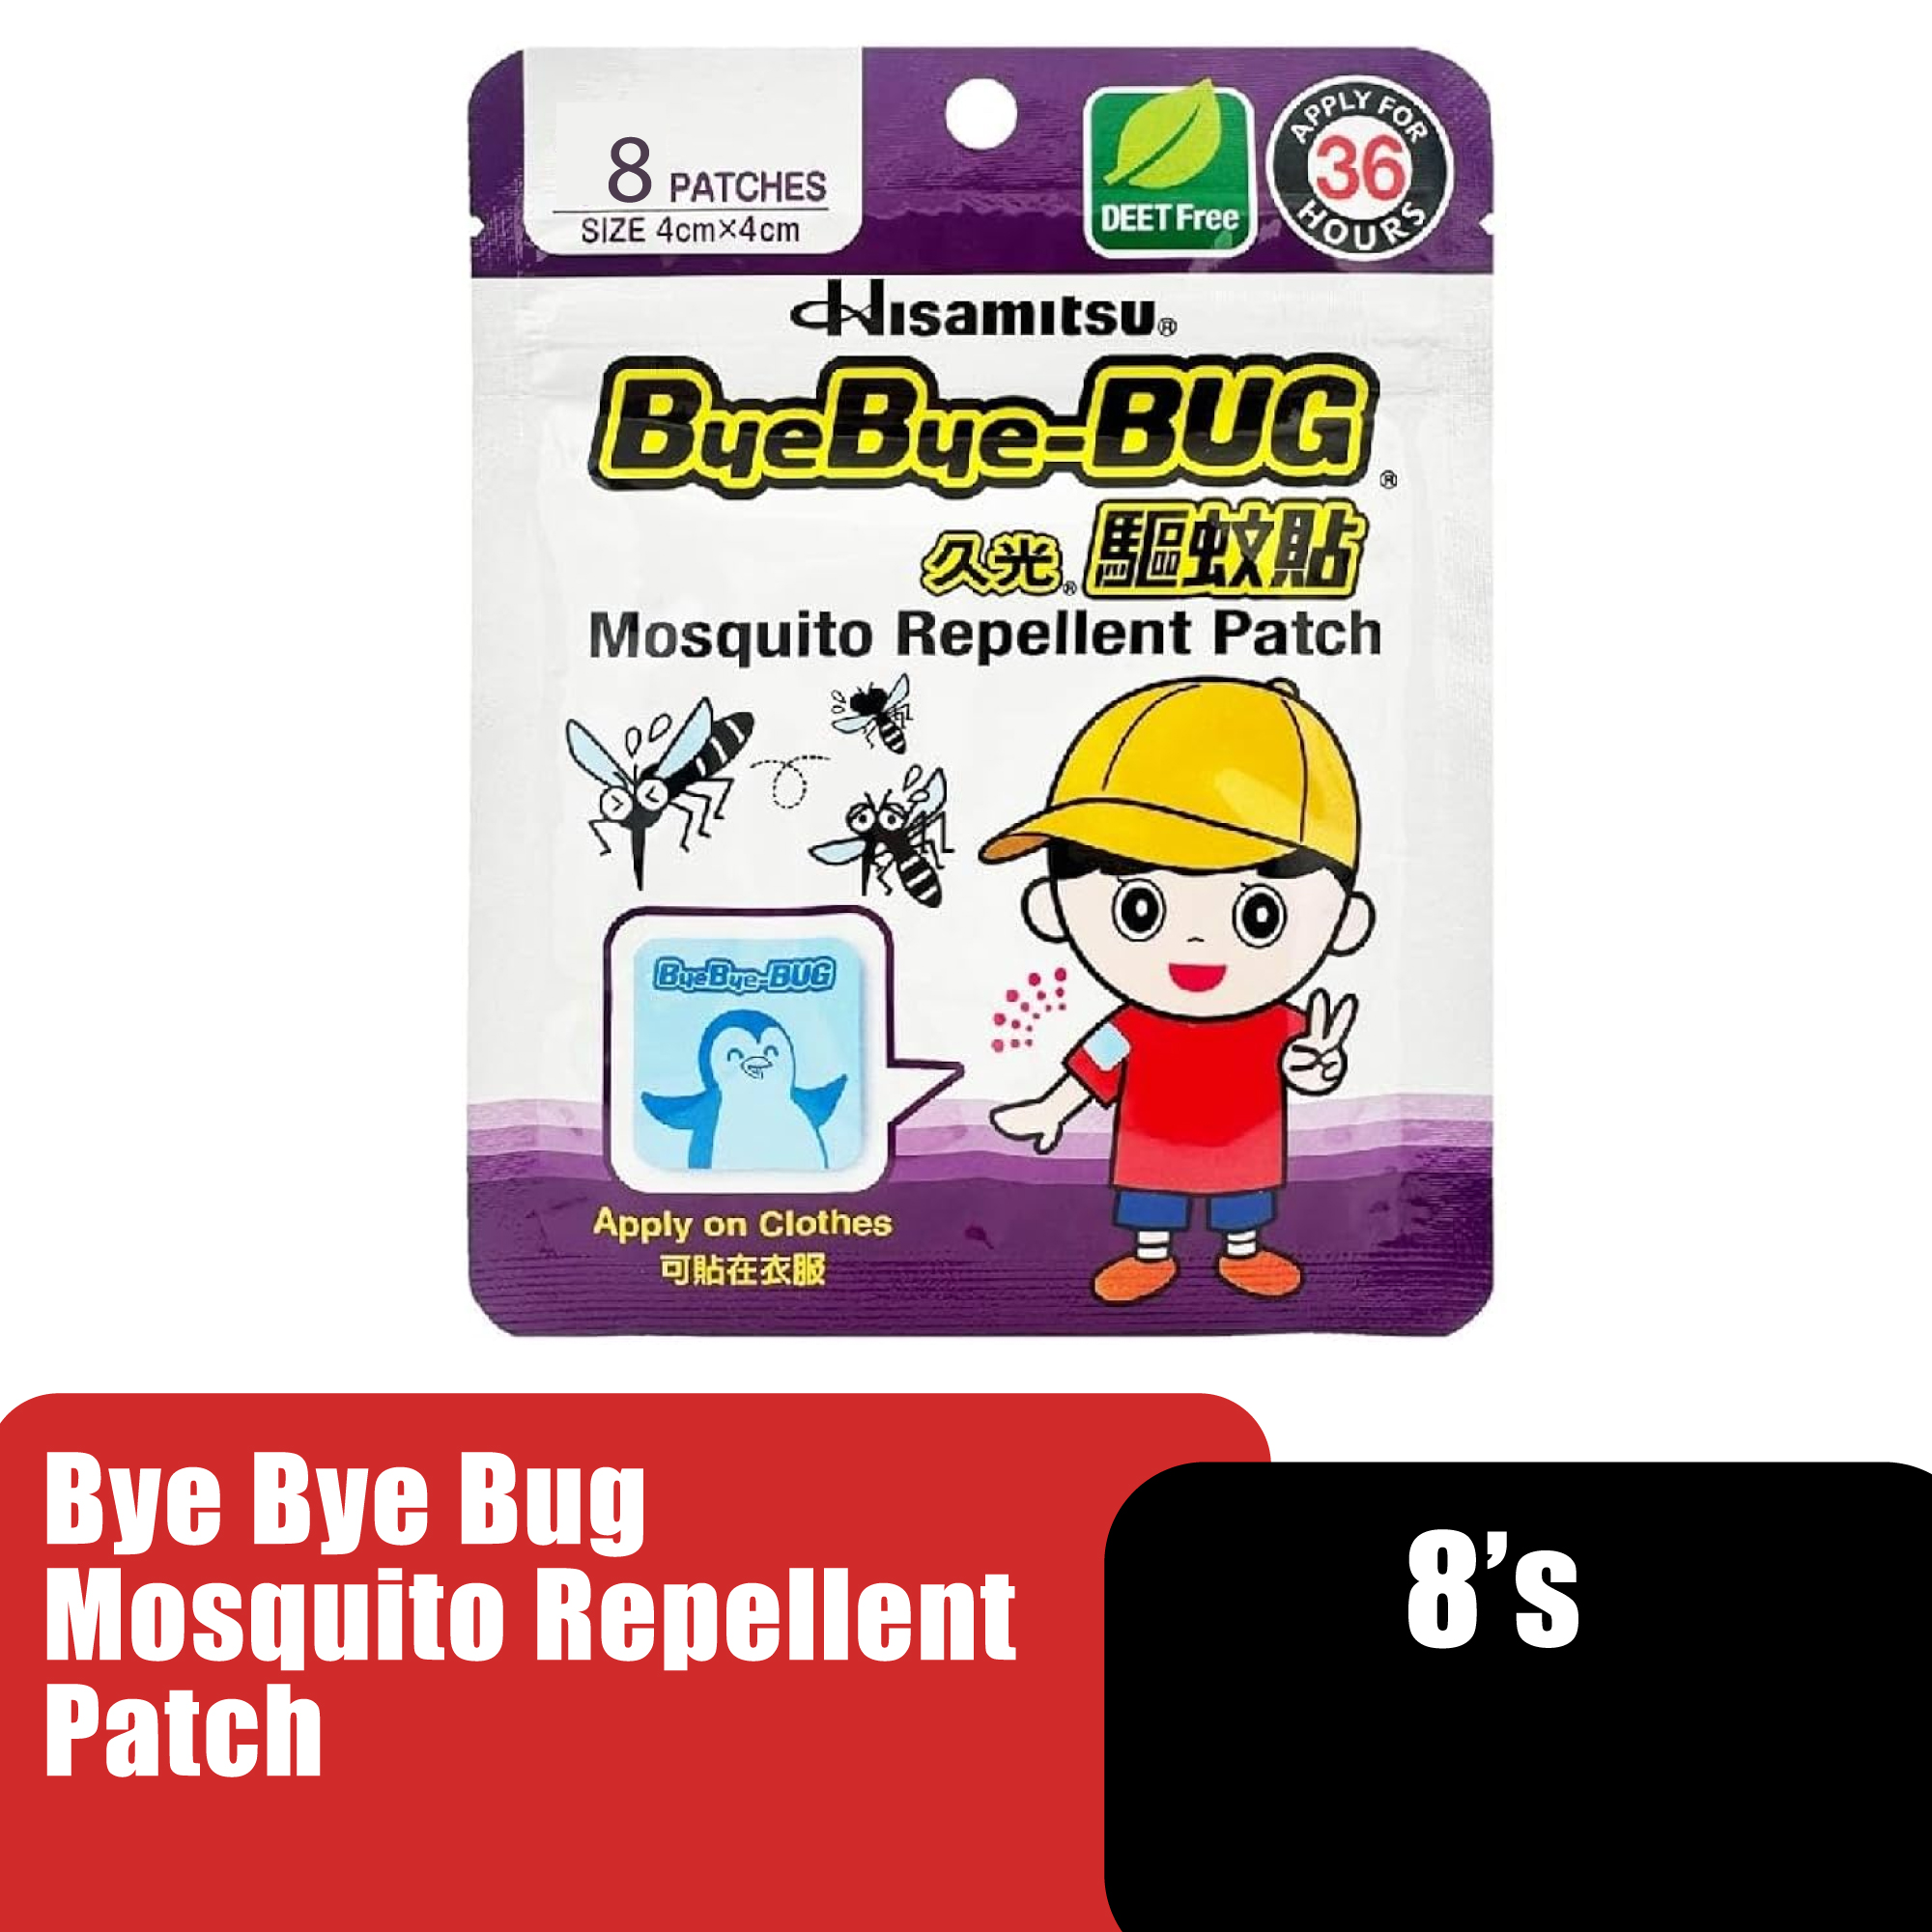 Bye Bye Bug Mosquito Repellant, Anti Mosquito Patch, Natural Mosquito Repellent 防蚊 - 8 x (4cm x 4cm)